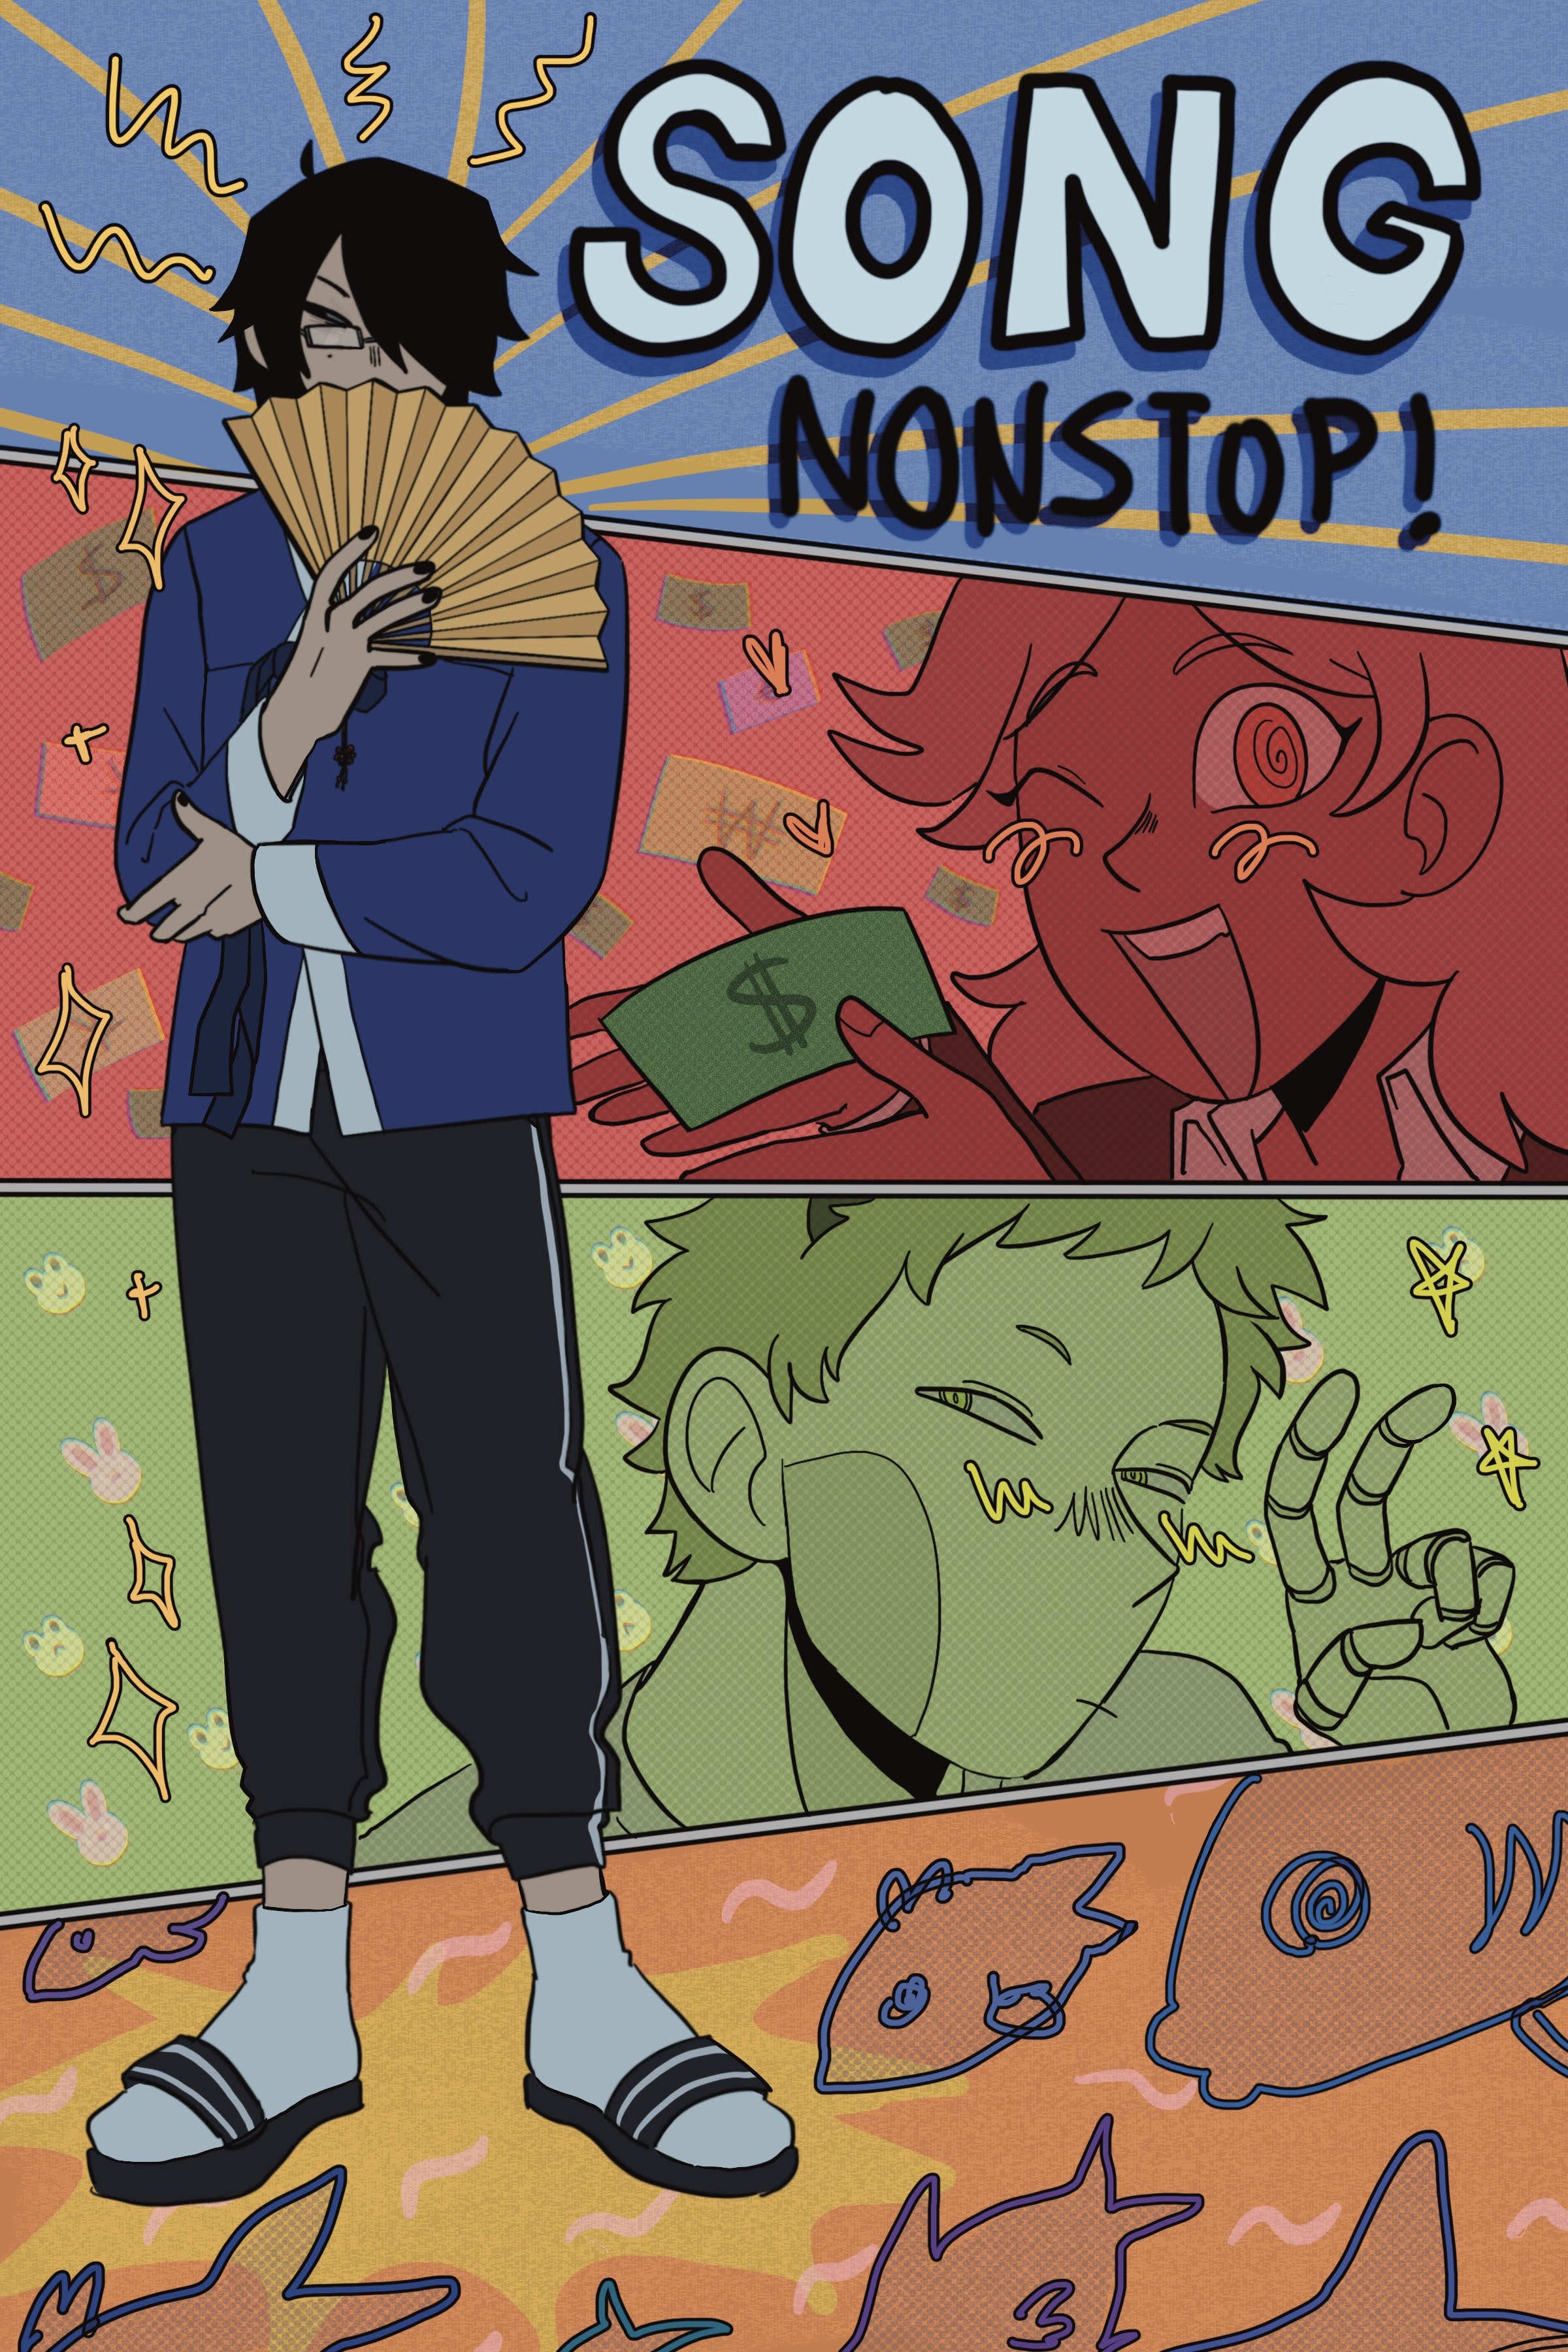 A drawing of Sado standing on the left side hiding his mouth with a fan. the background is split into 4 parts horizontally, the first part says SONG NONSTOP, the second part below that shows Aria winking and showing off a bill with other types of currency in the back, the third part shows It0-pan holding up a peace sign with a frog and rabbit patterned background, and the last part shows a scribbled fish and worm pattern.